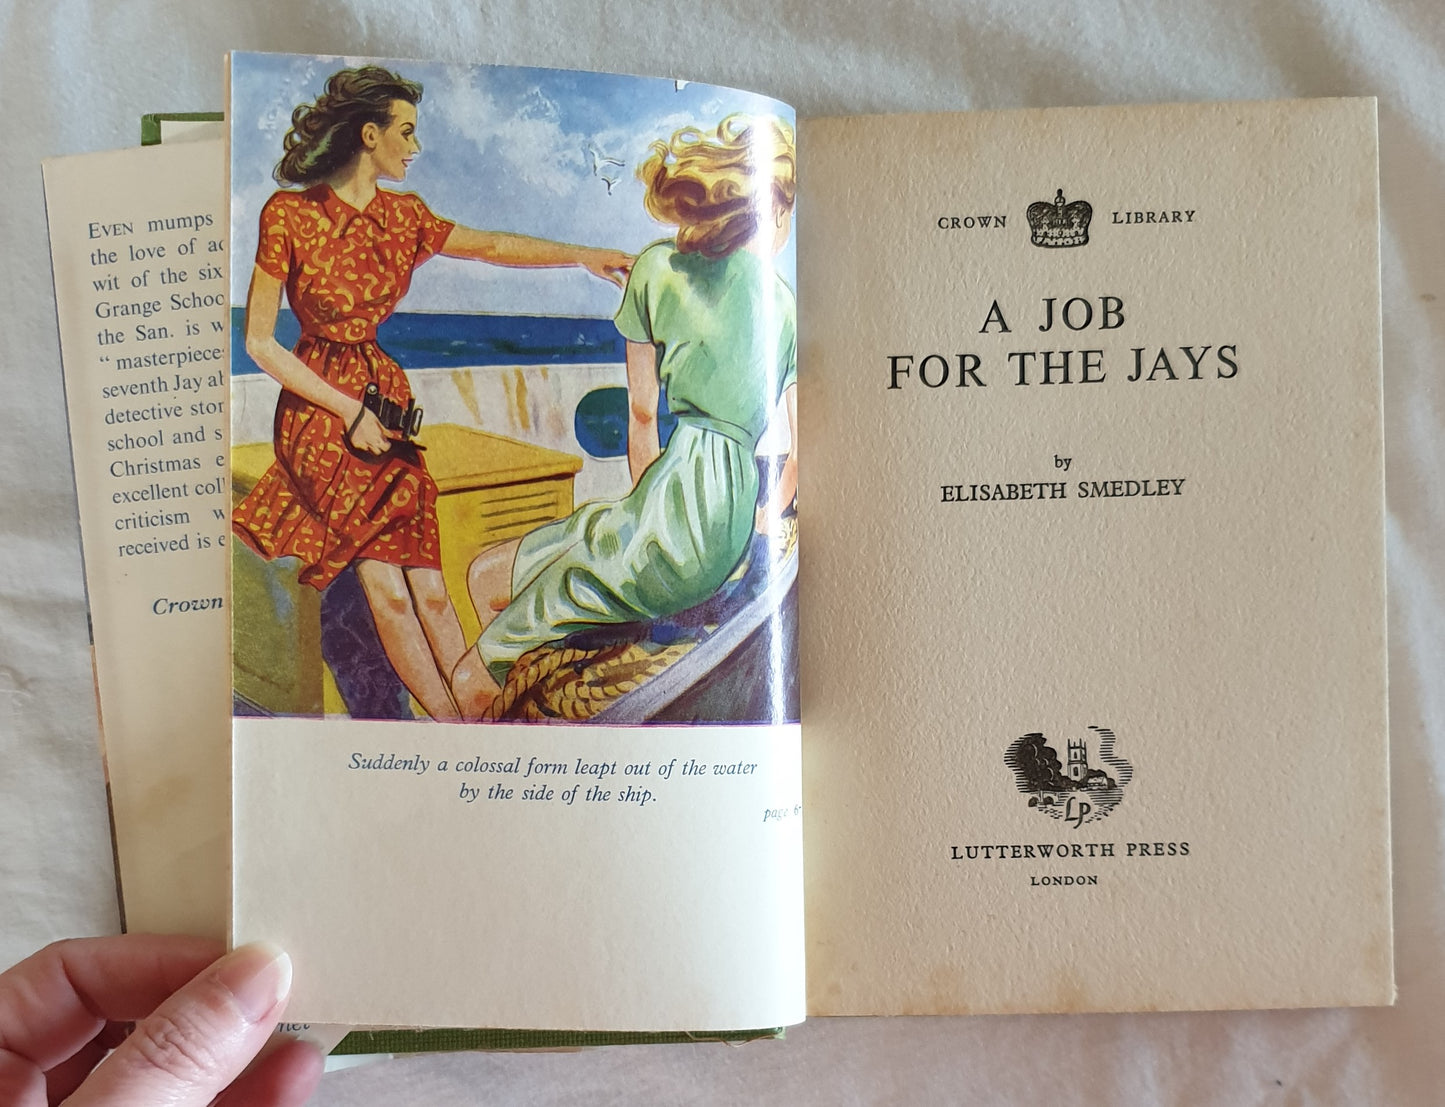 A Job for the Jays by Elisabeth Smedley